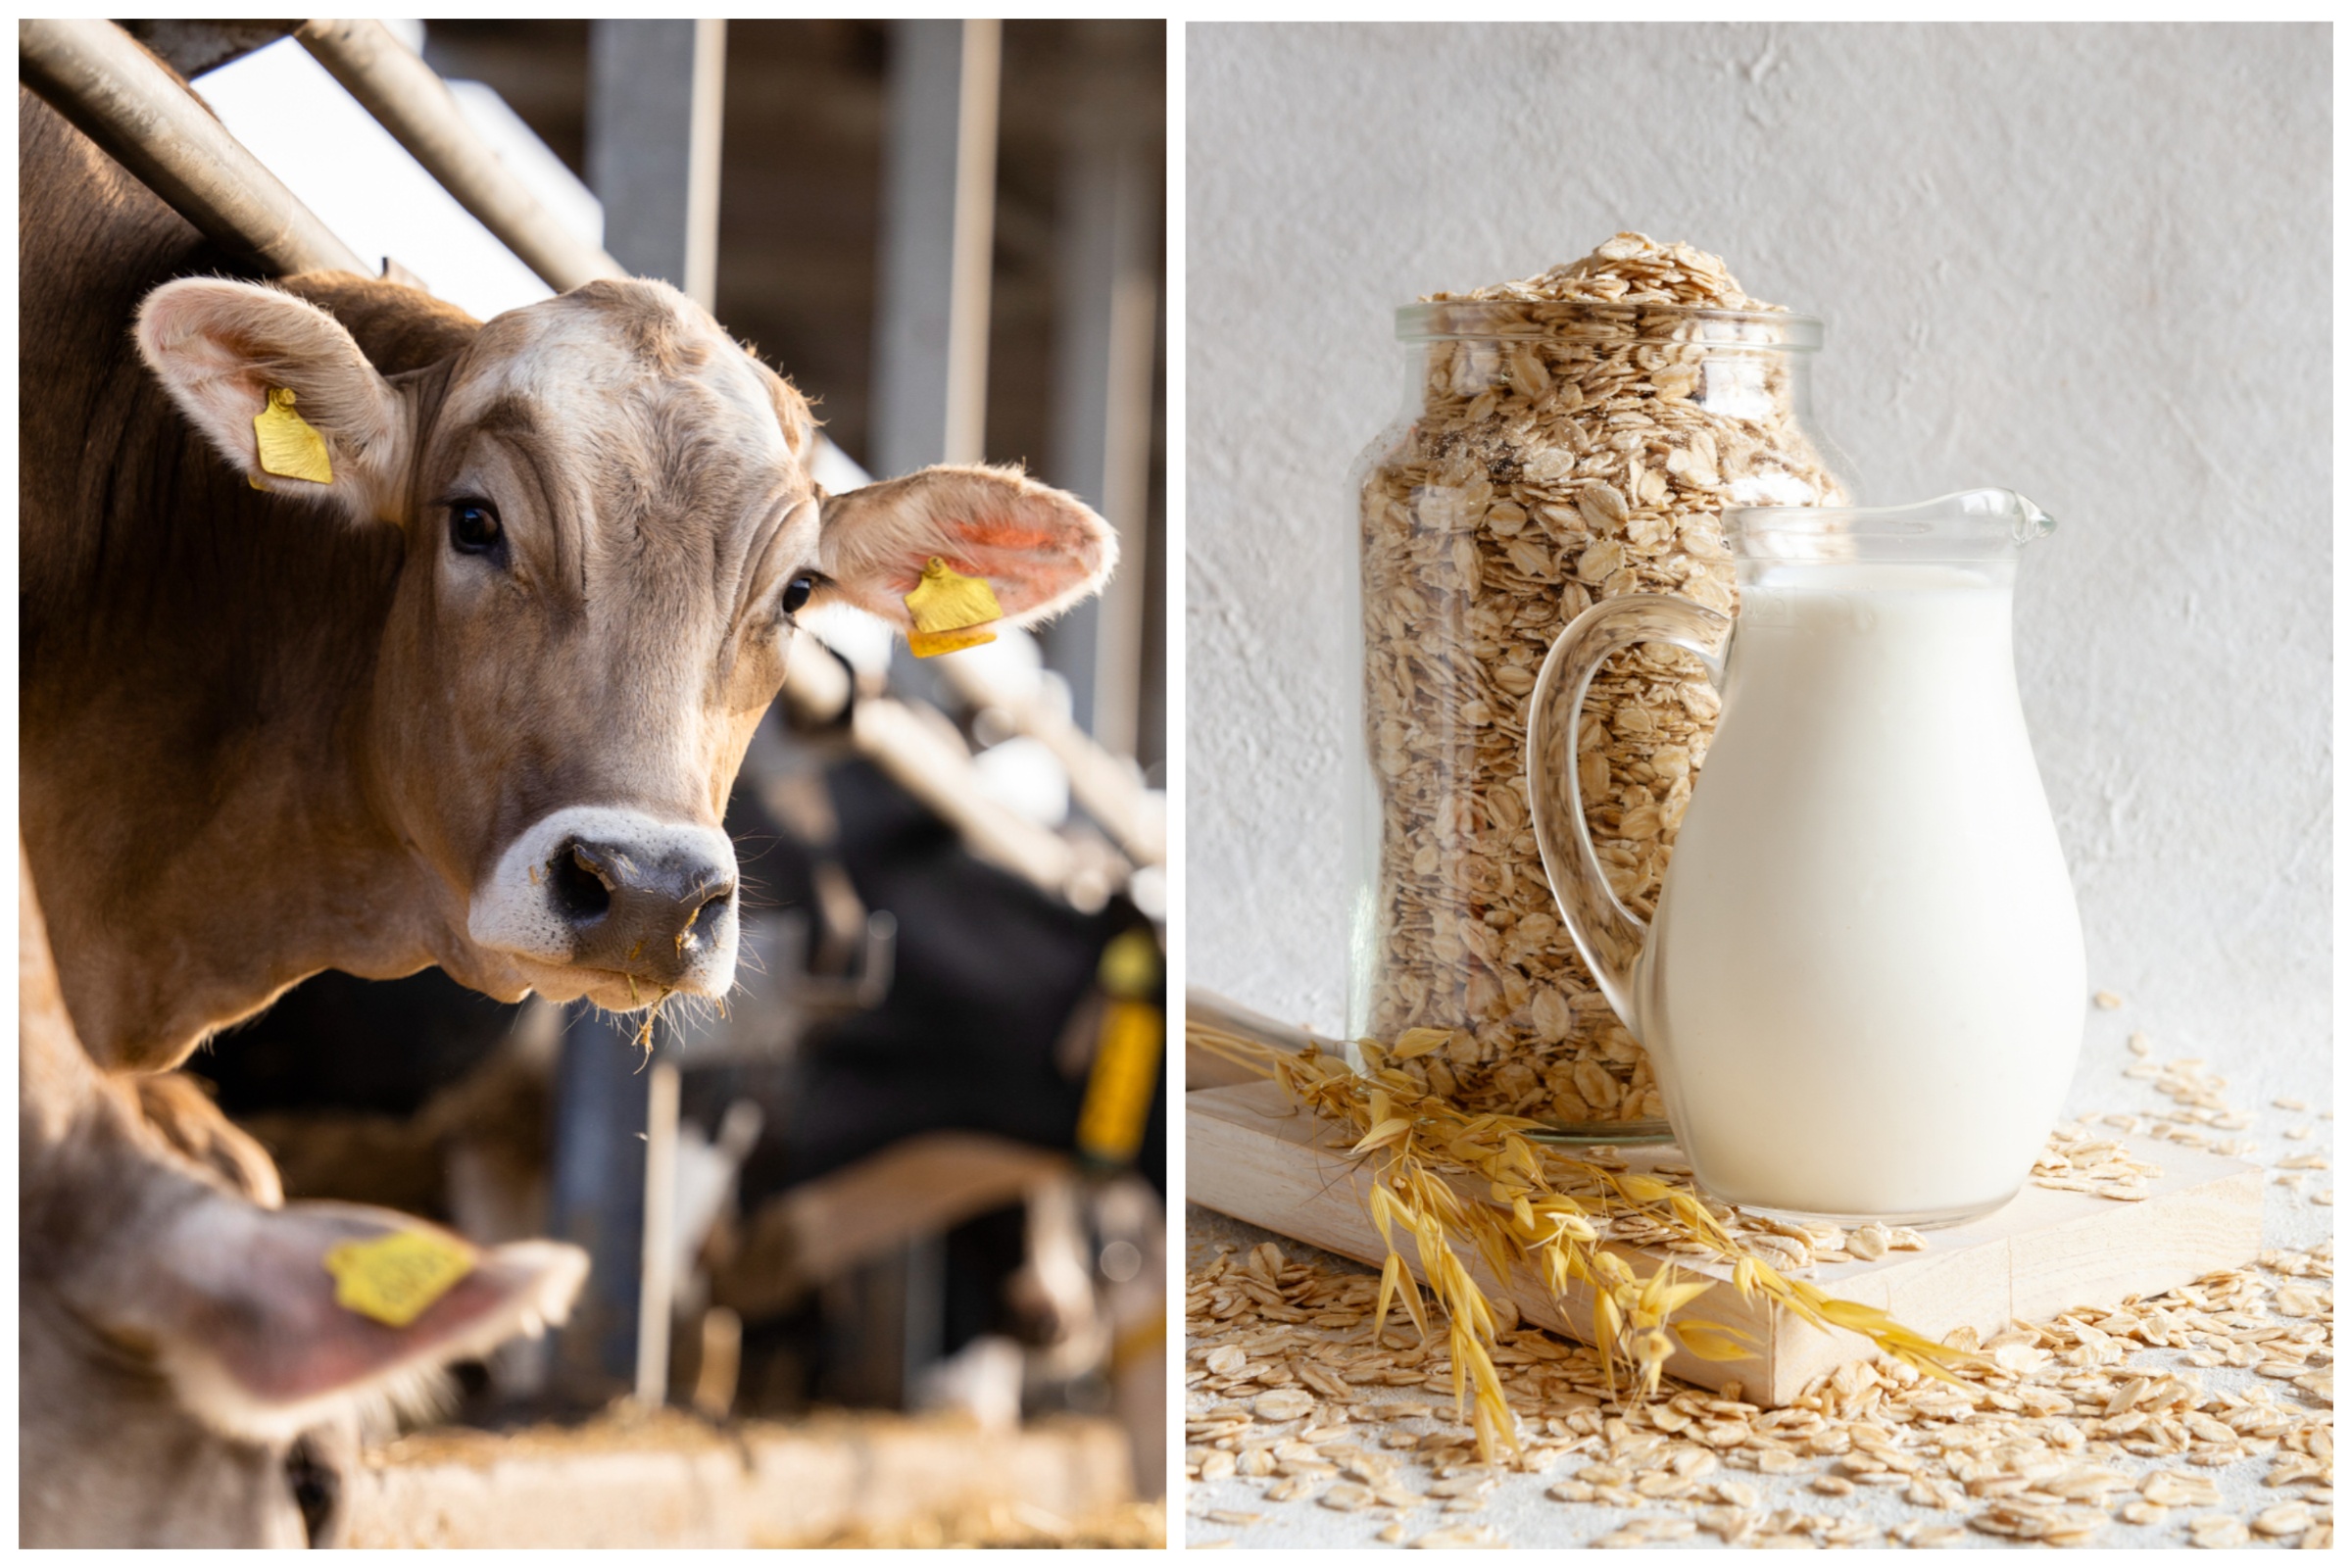 Plant milks or dairy: What's better for you and planet Earth?